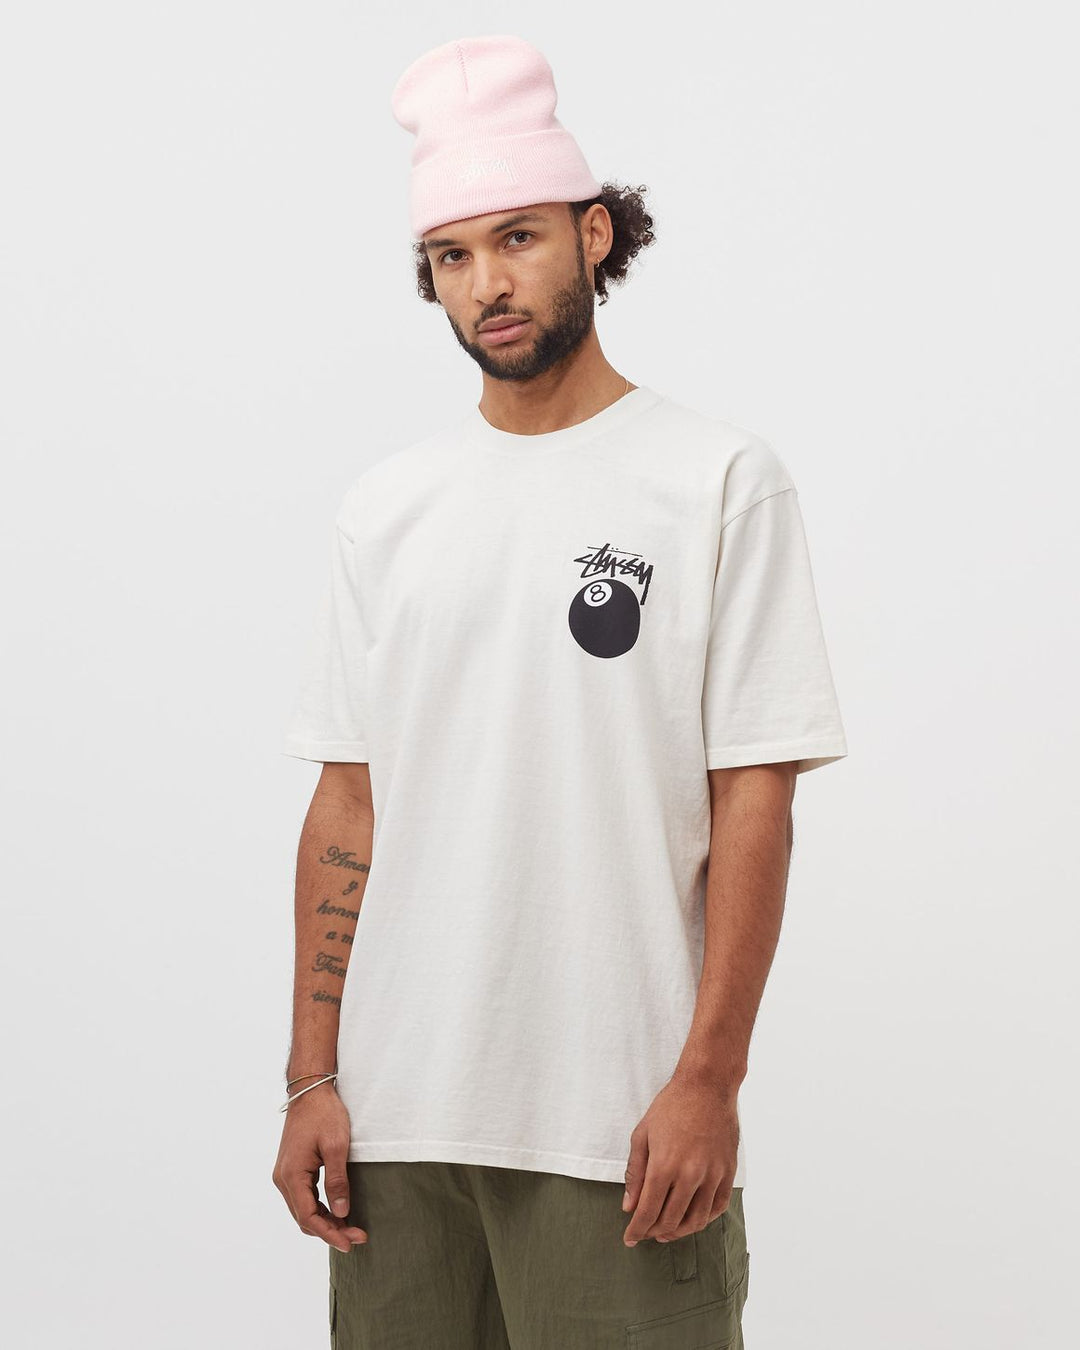 Stussy 8 Ball Pigment Dyed Tee Natural | Hype Vault Kuala Lumpur | Asia's Top Trusted High-End Sneakers and Streetwear Store | Guaranteed 100% authentic